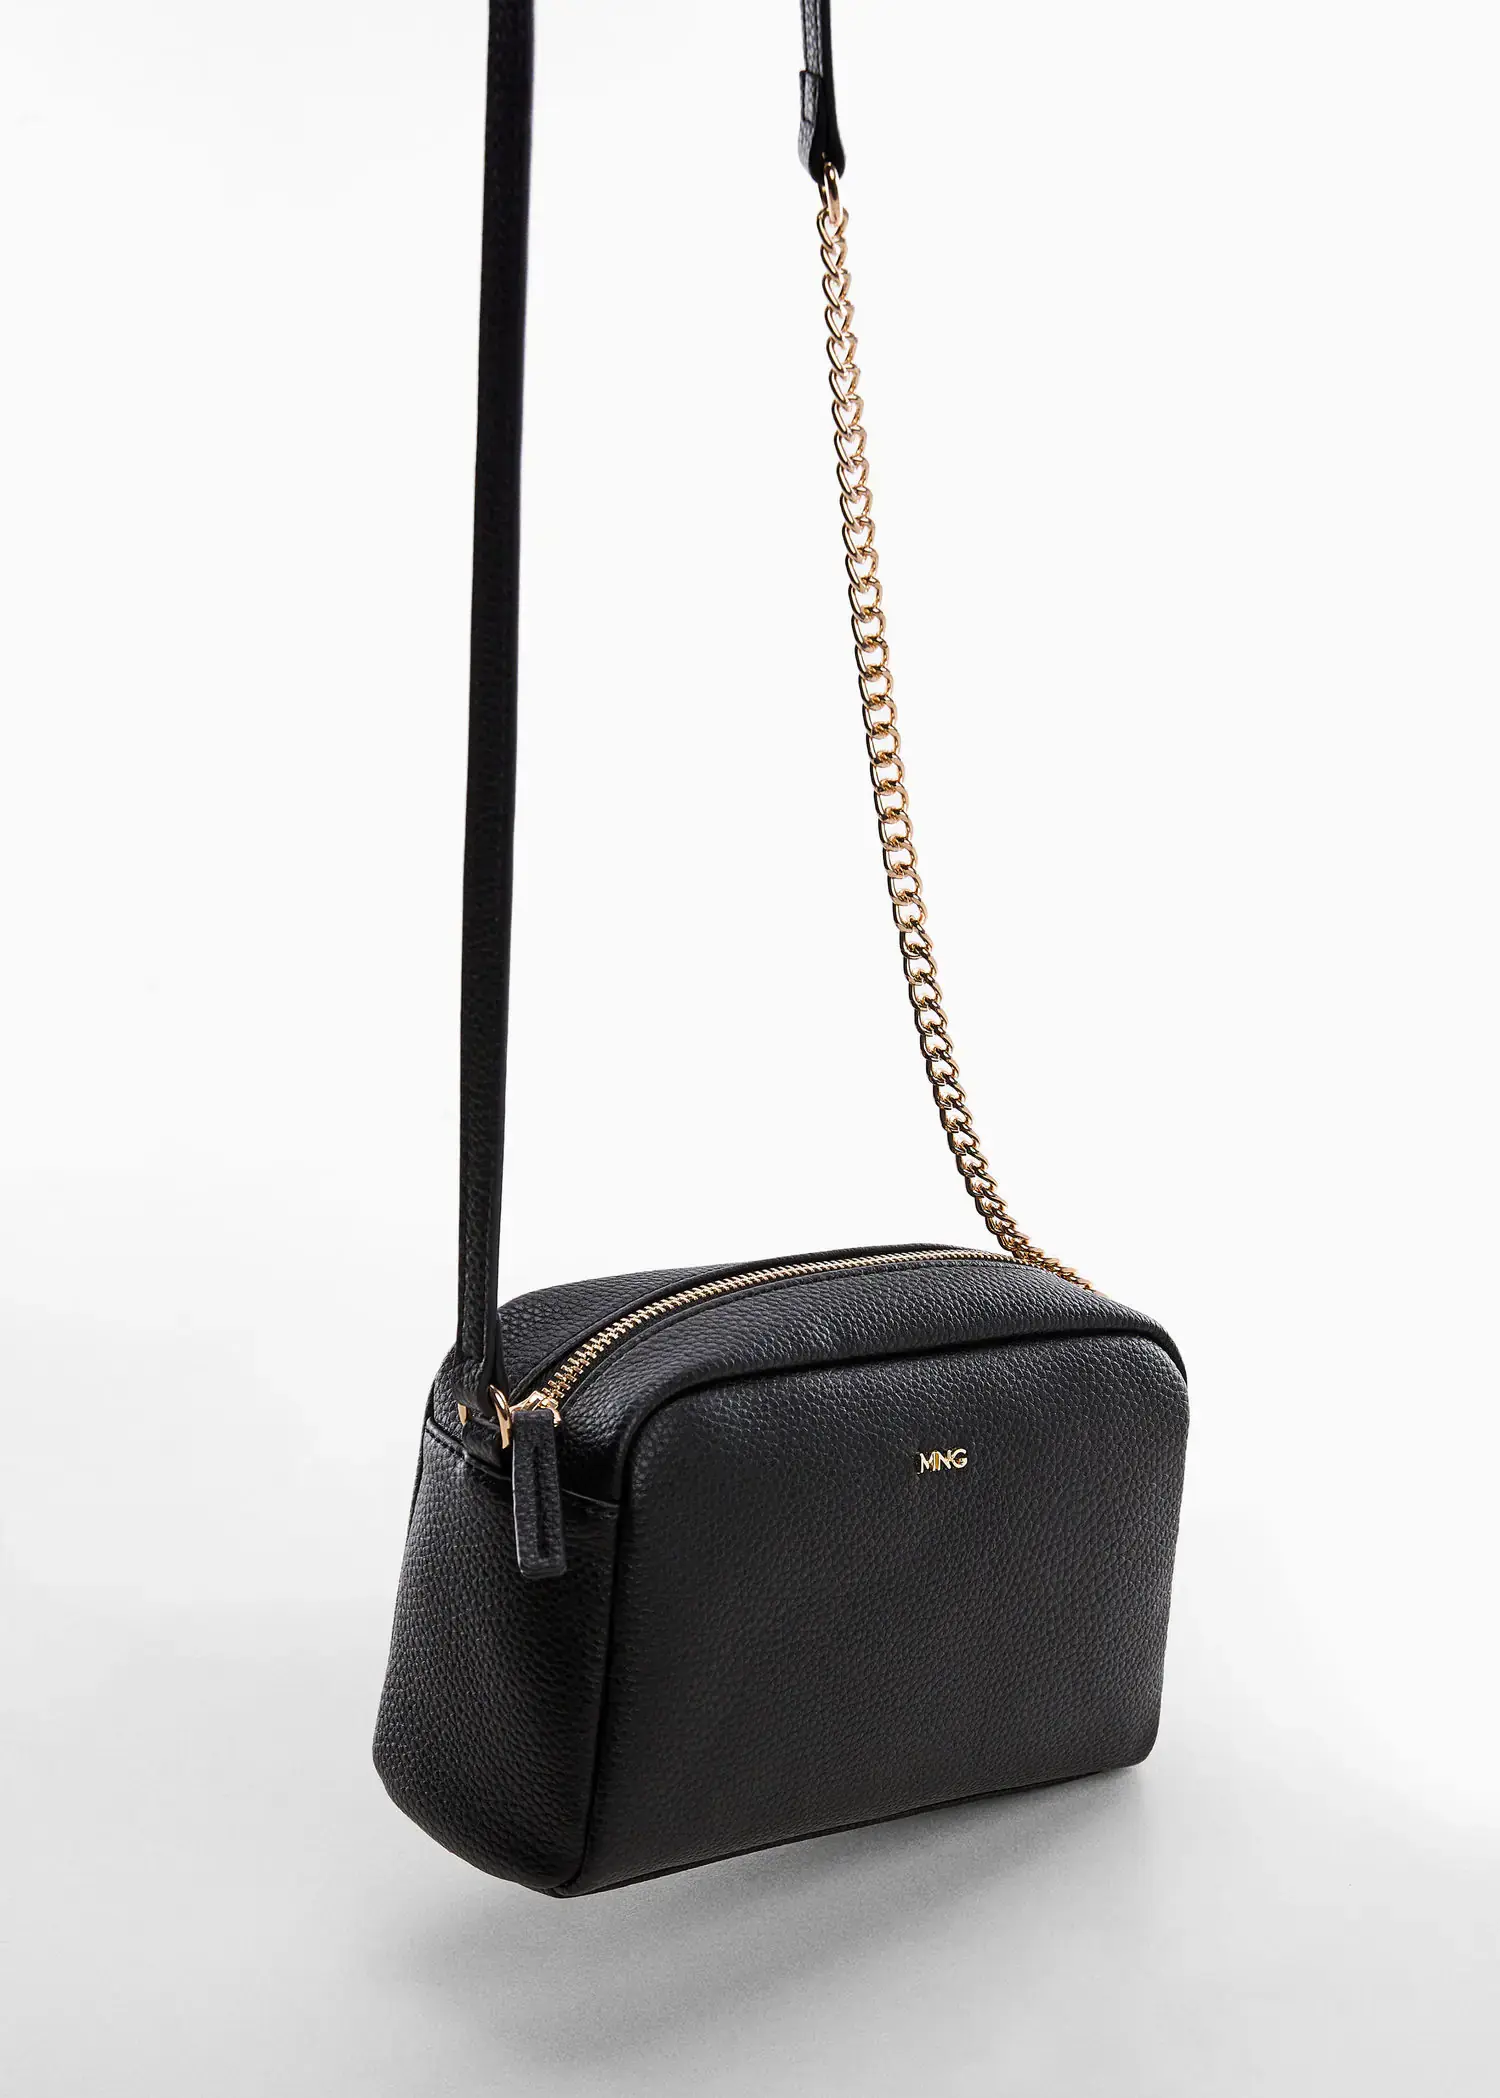 Mango Crossbody bag with chain. a black purse with a gold chain strap. 